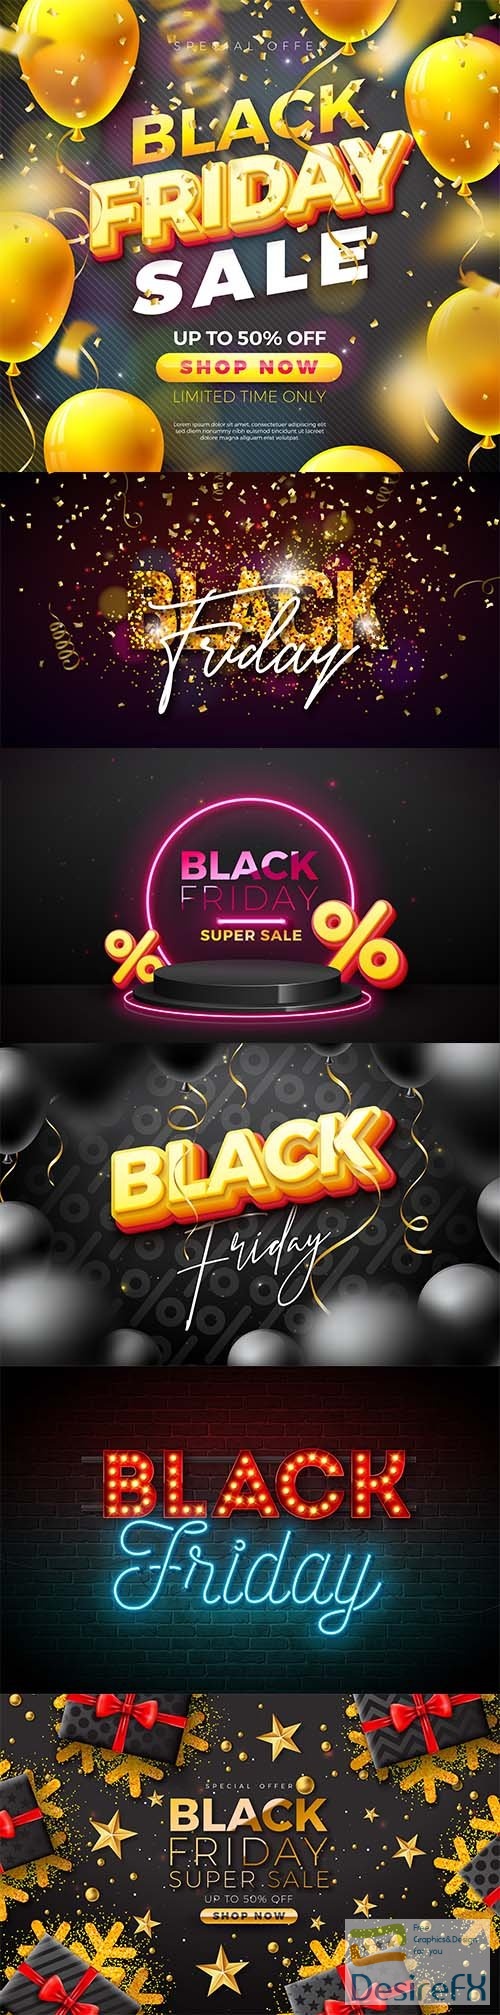 Black friday sale vector illustration with text lettering